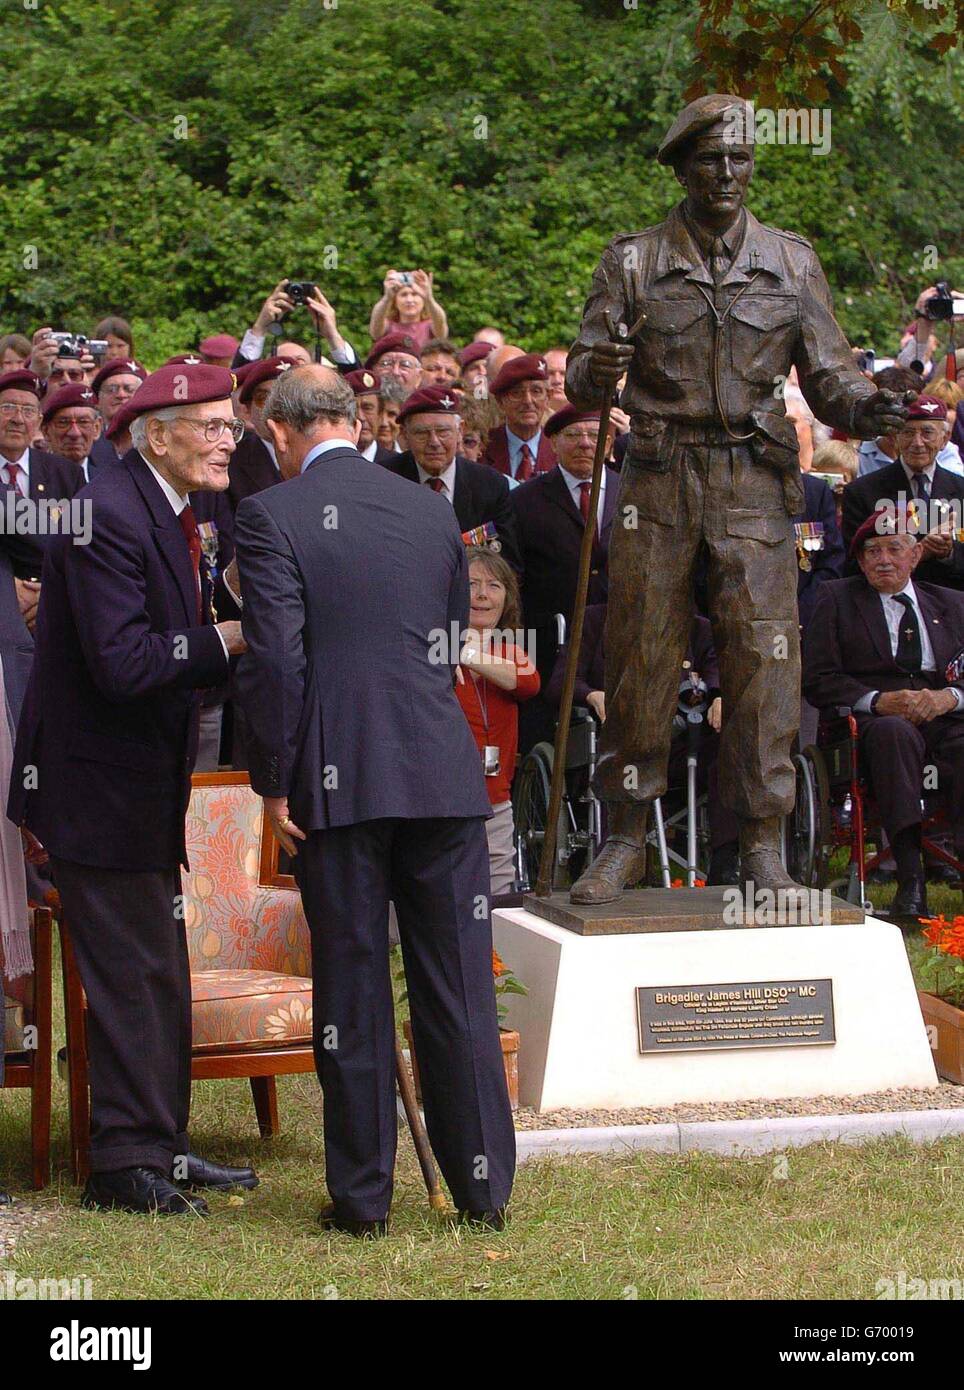 The Prince of Wales greets veterans from 3rd Parachute Brigade, at Le Mesnil, in Normnady, north west France where he also unveiled a statue of the Brigadier Sir James Hill - the last surviving officer of Brigadier / General rank of the Normandy campaign. The Prince is in north-west France for a day of engagements on the eve of the 60th anniversary of the Allied invasion of Europe. Stock Photo